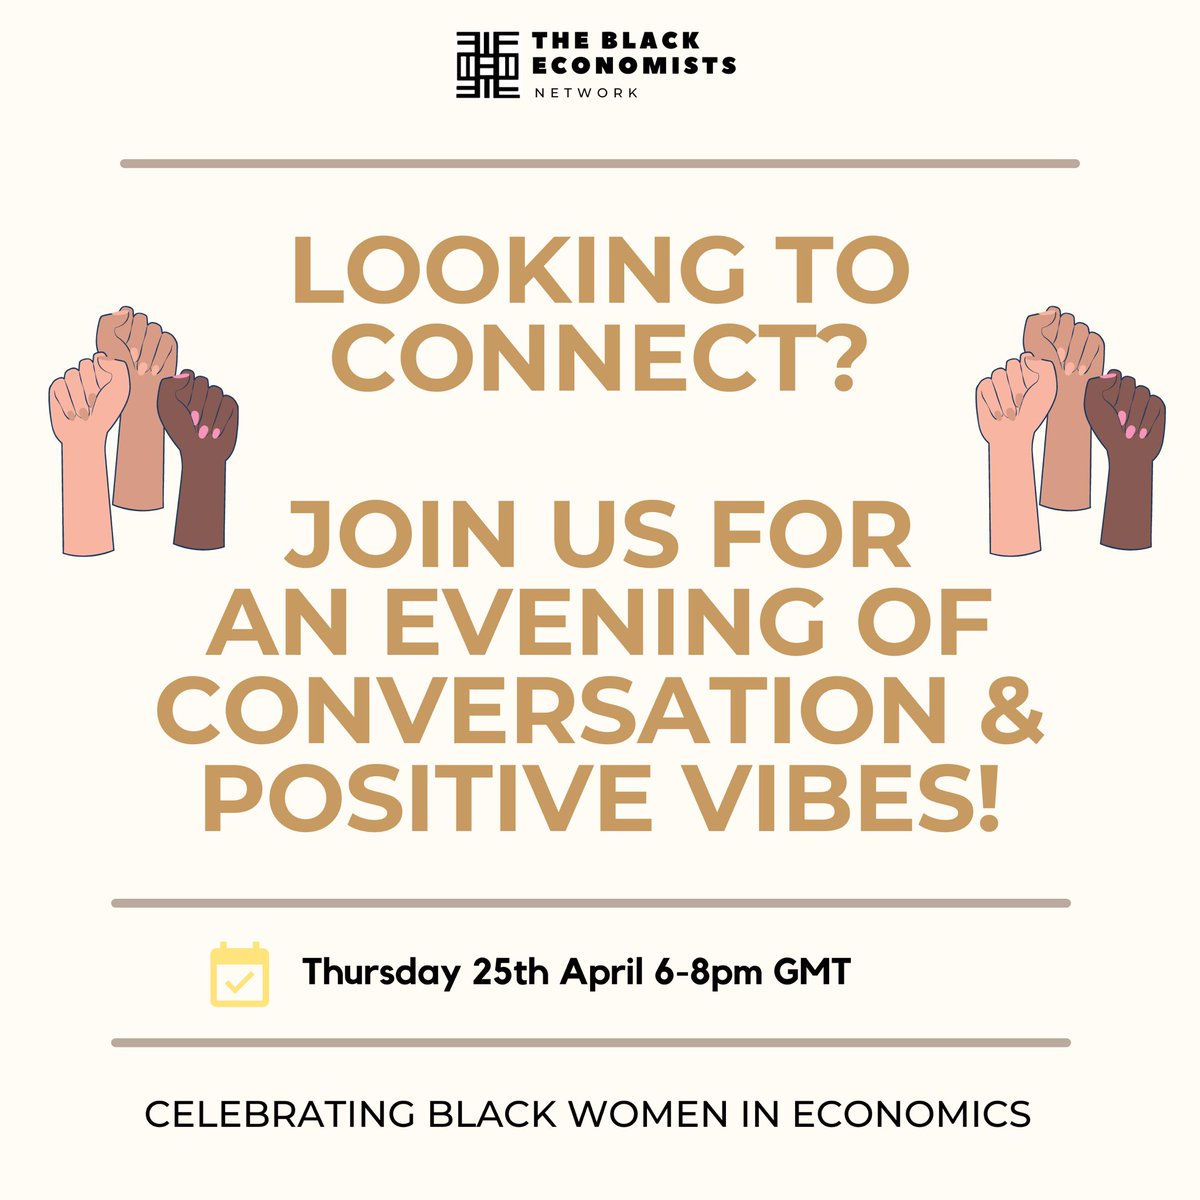 If you’re looking for a space to meet & build connections with like-minded people in economics, then our event is for you! 🎉🌟Join us Thursday, April 25th, 6-8pm! Don't miss out - secure your (free!) ticket now for in-person or online entry. Link here: tben.co.uk/events/tben-wo…